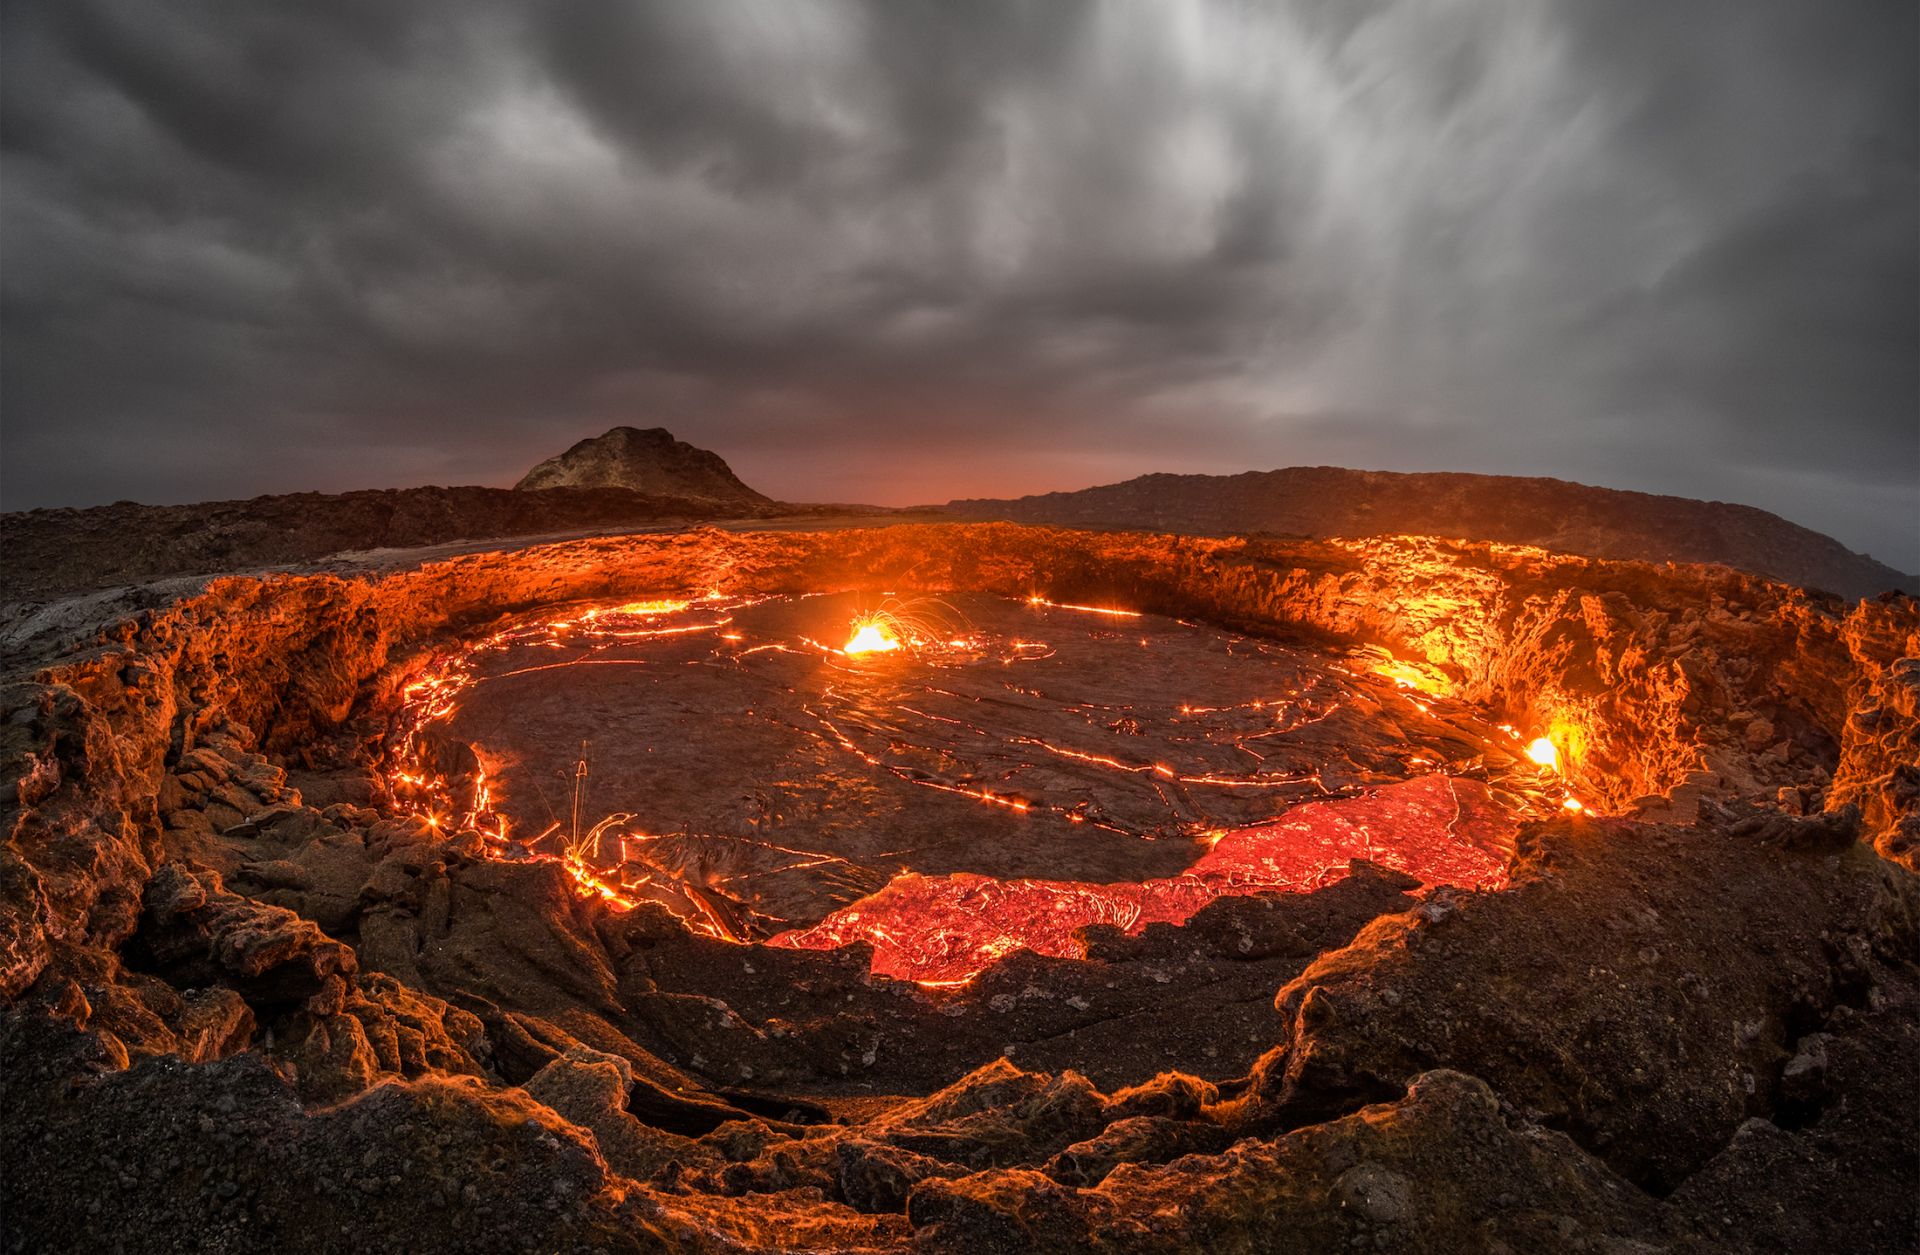 Lava rises to the top inside Erta Ale volcano in the Afar region of northeastern Ethiopia. The Ethiopian volcano is home to the world's oldest continuously active lava lake, known as the "Gateway To Hell."